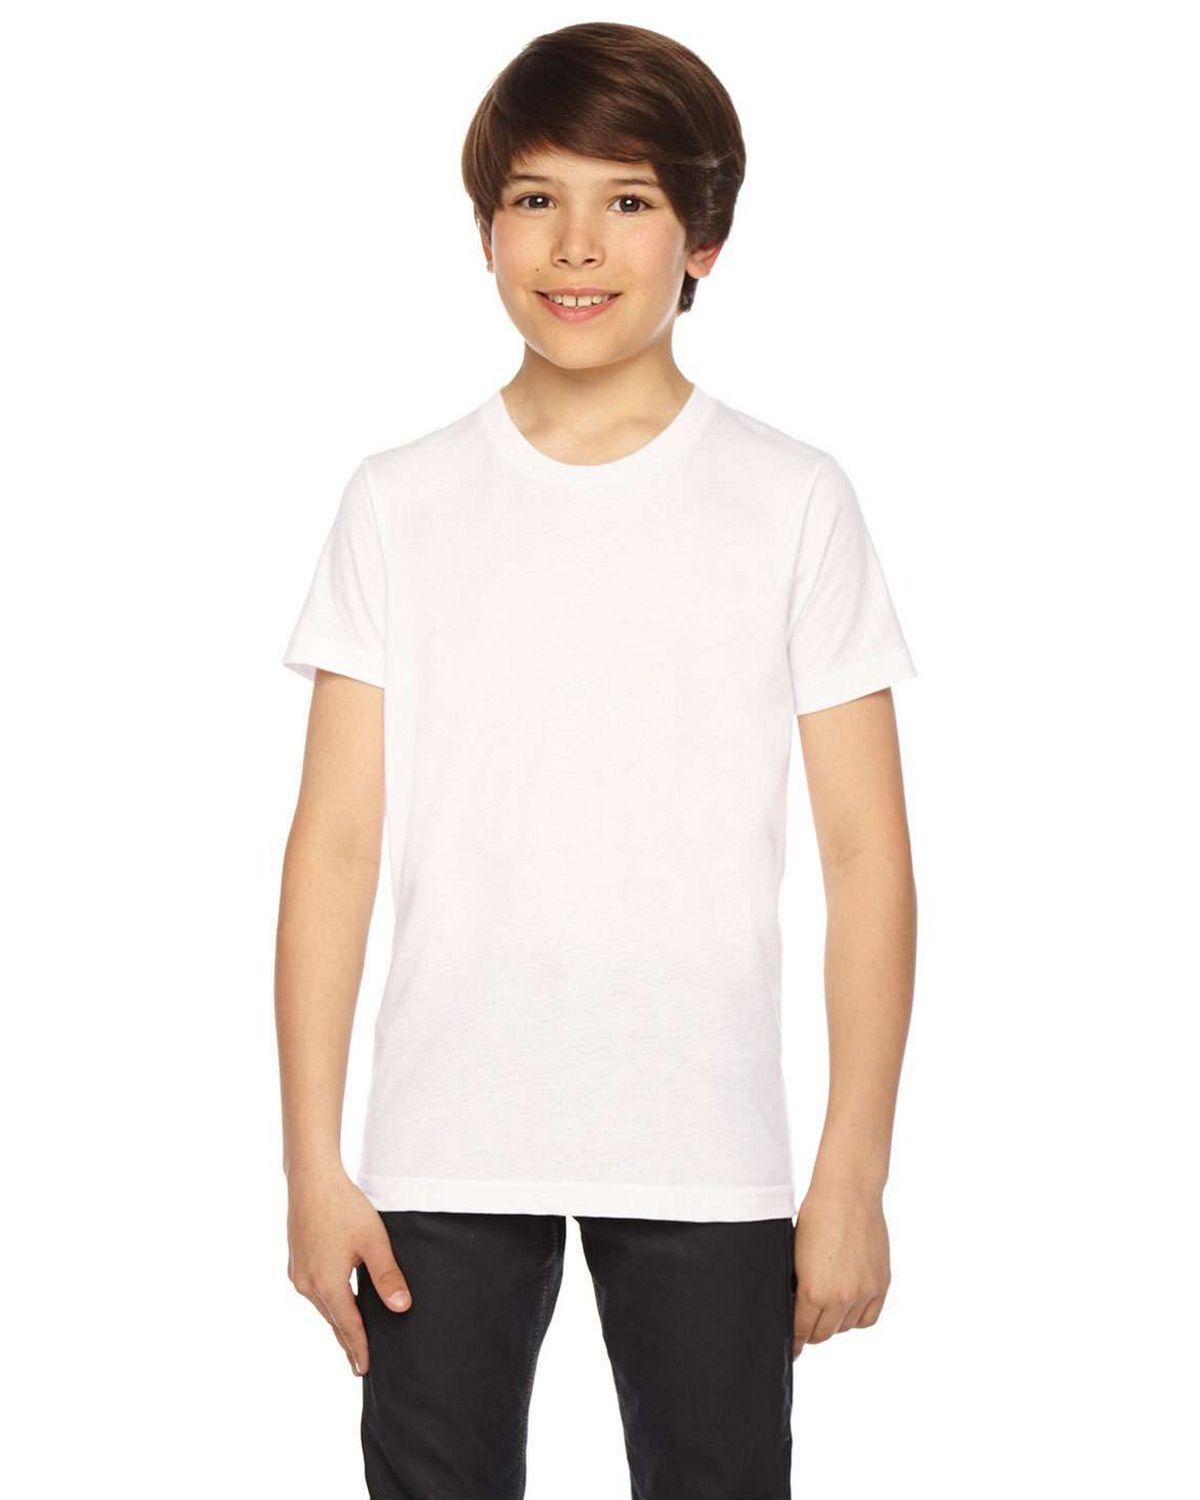 American Apparel BB201W Youth Poly-Cotton T-Shirt